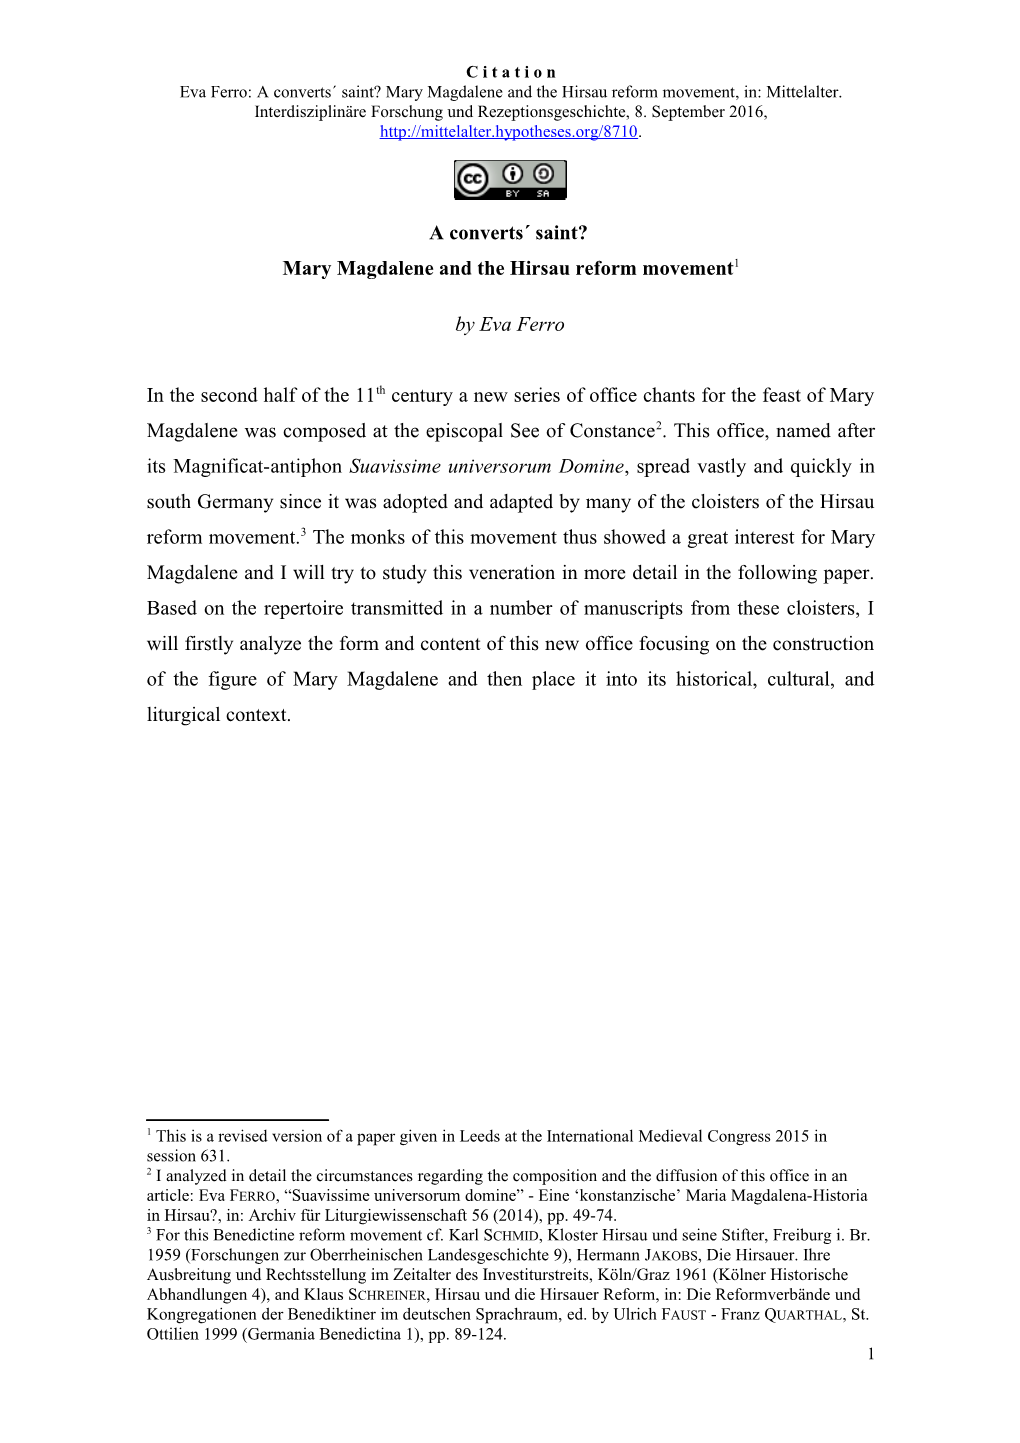 A Converts´ Saint? Mary Magdalene and the Hirsau Reform Movement, In: Mittelalter